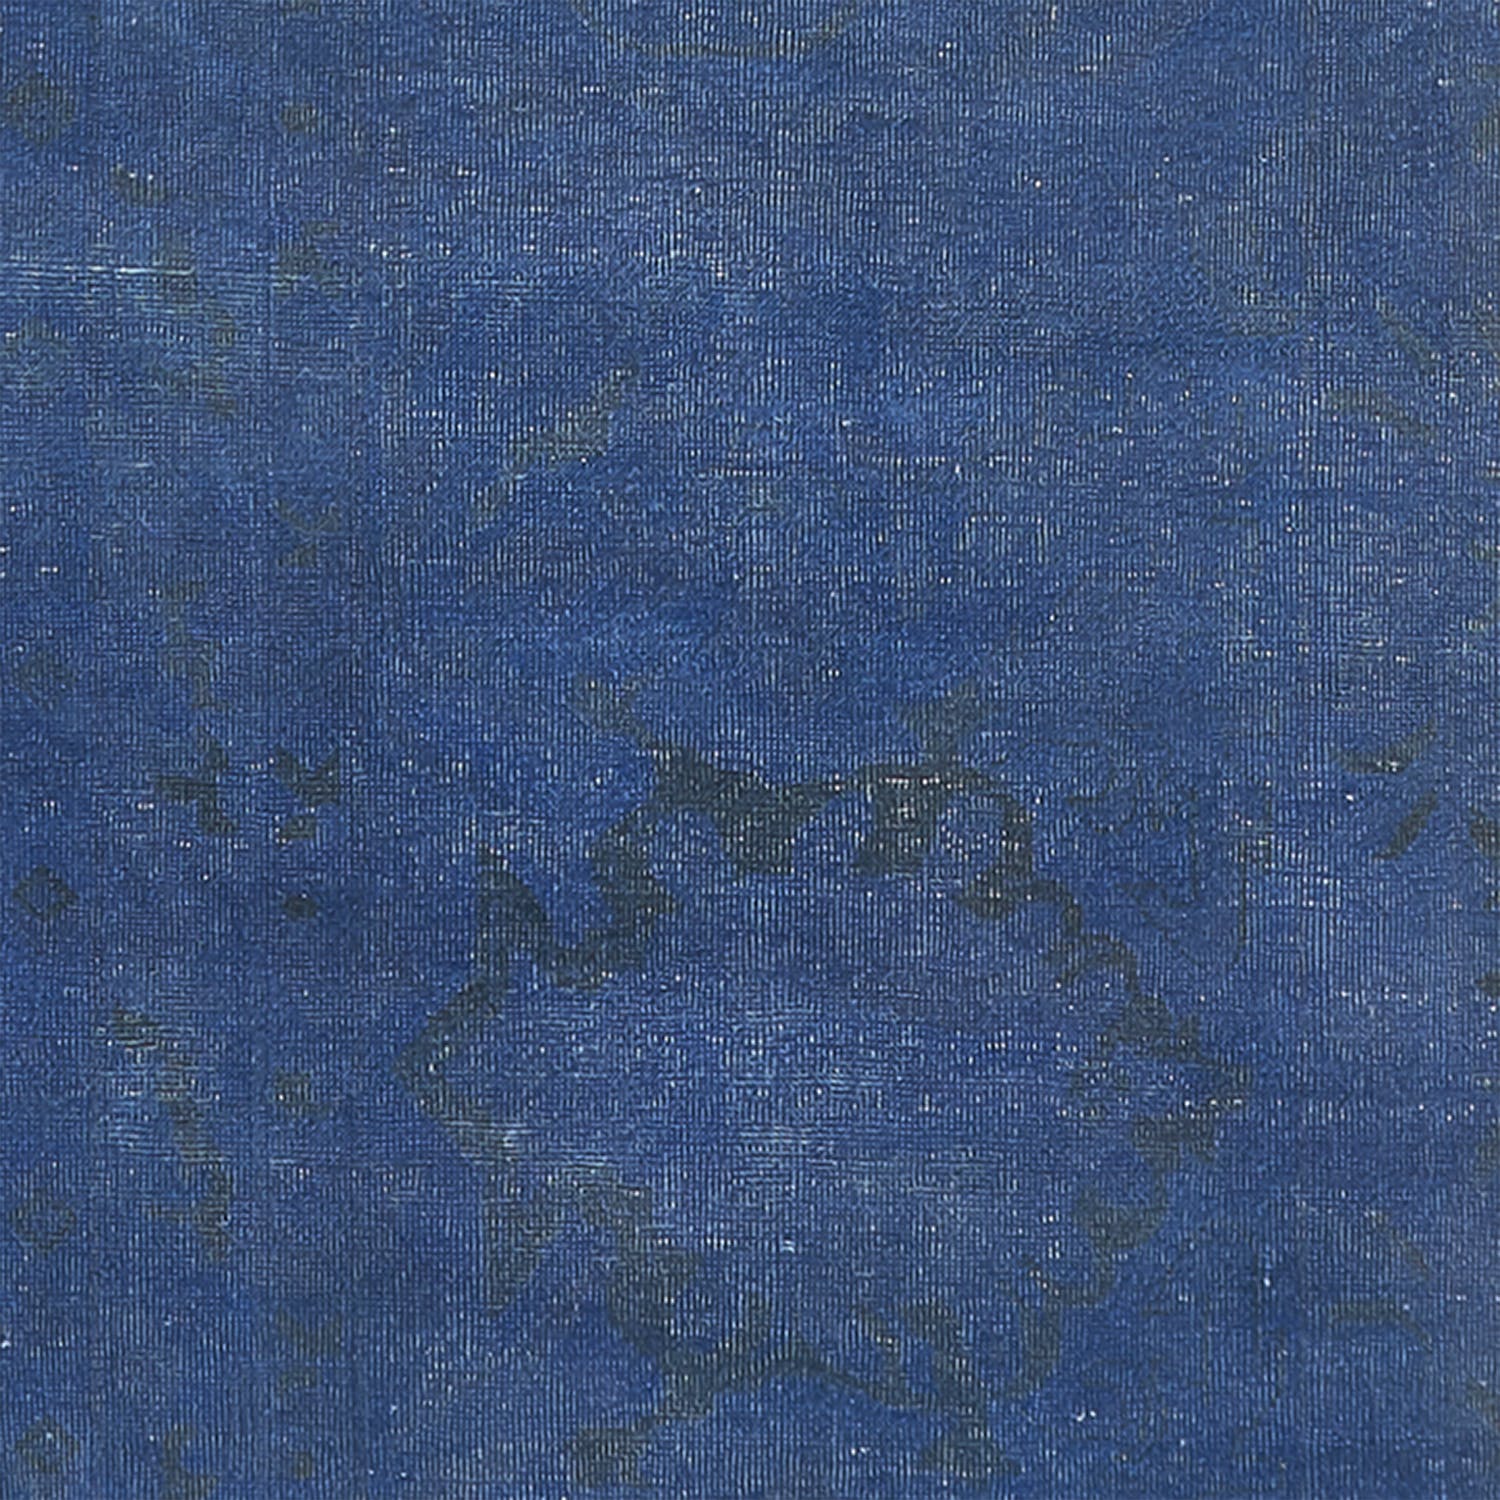 Close-up of blue denim fabric showcasing twill weaving pattern and texture.